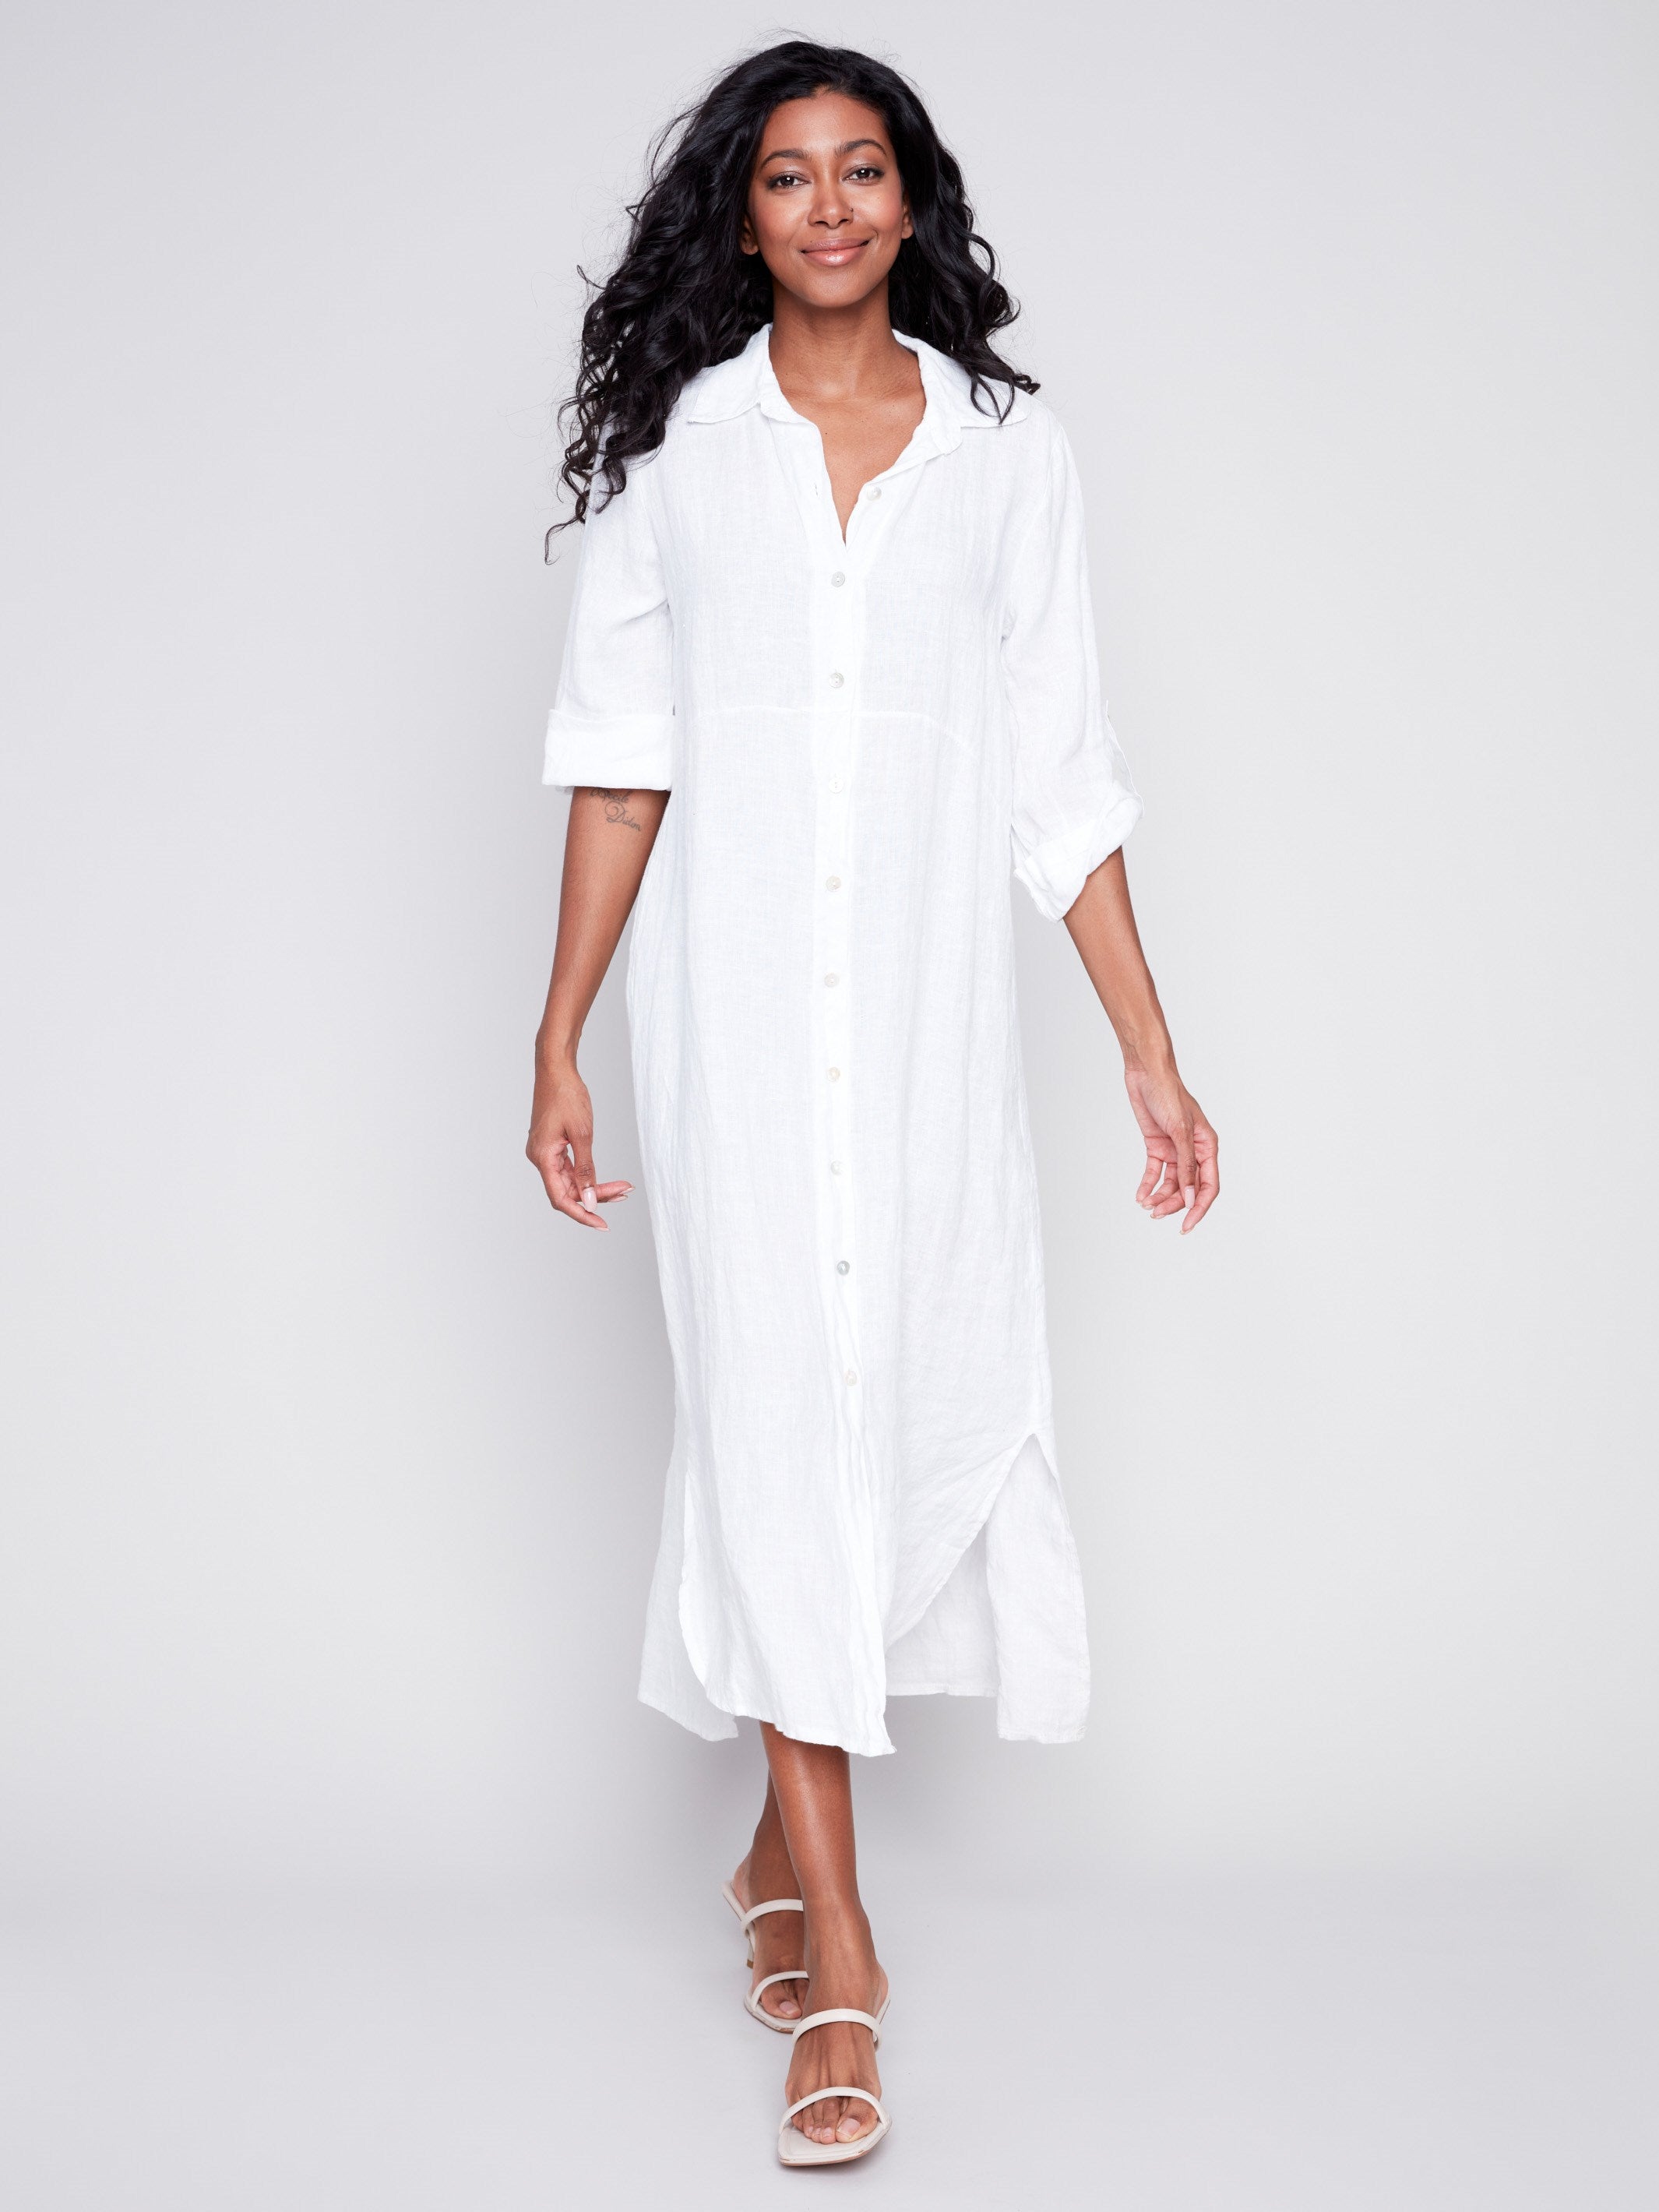 Long Linen Tunic Dress - White - Charlie B Collection Canada - Image 2